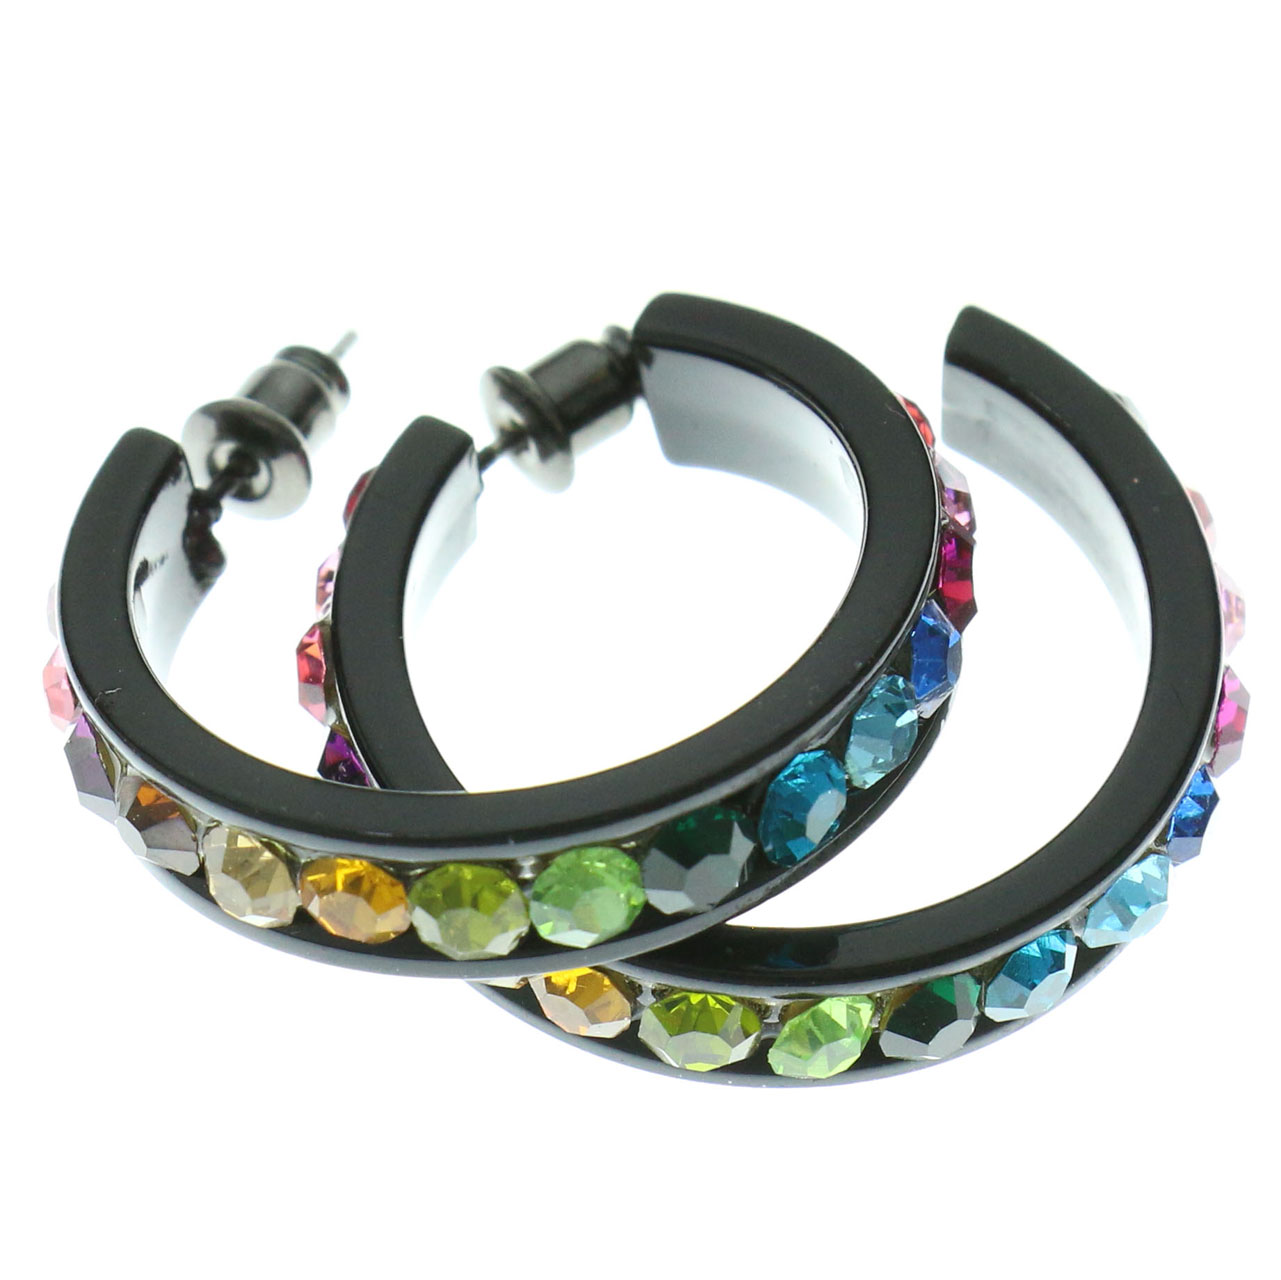 MI AMORE Hoop Earrings With Multi-Color Faceted Crystal Accents Black